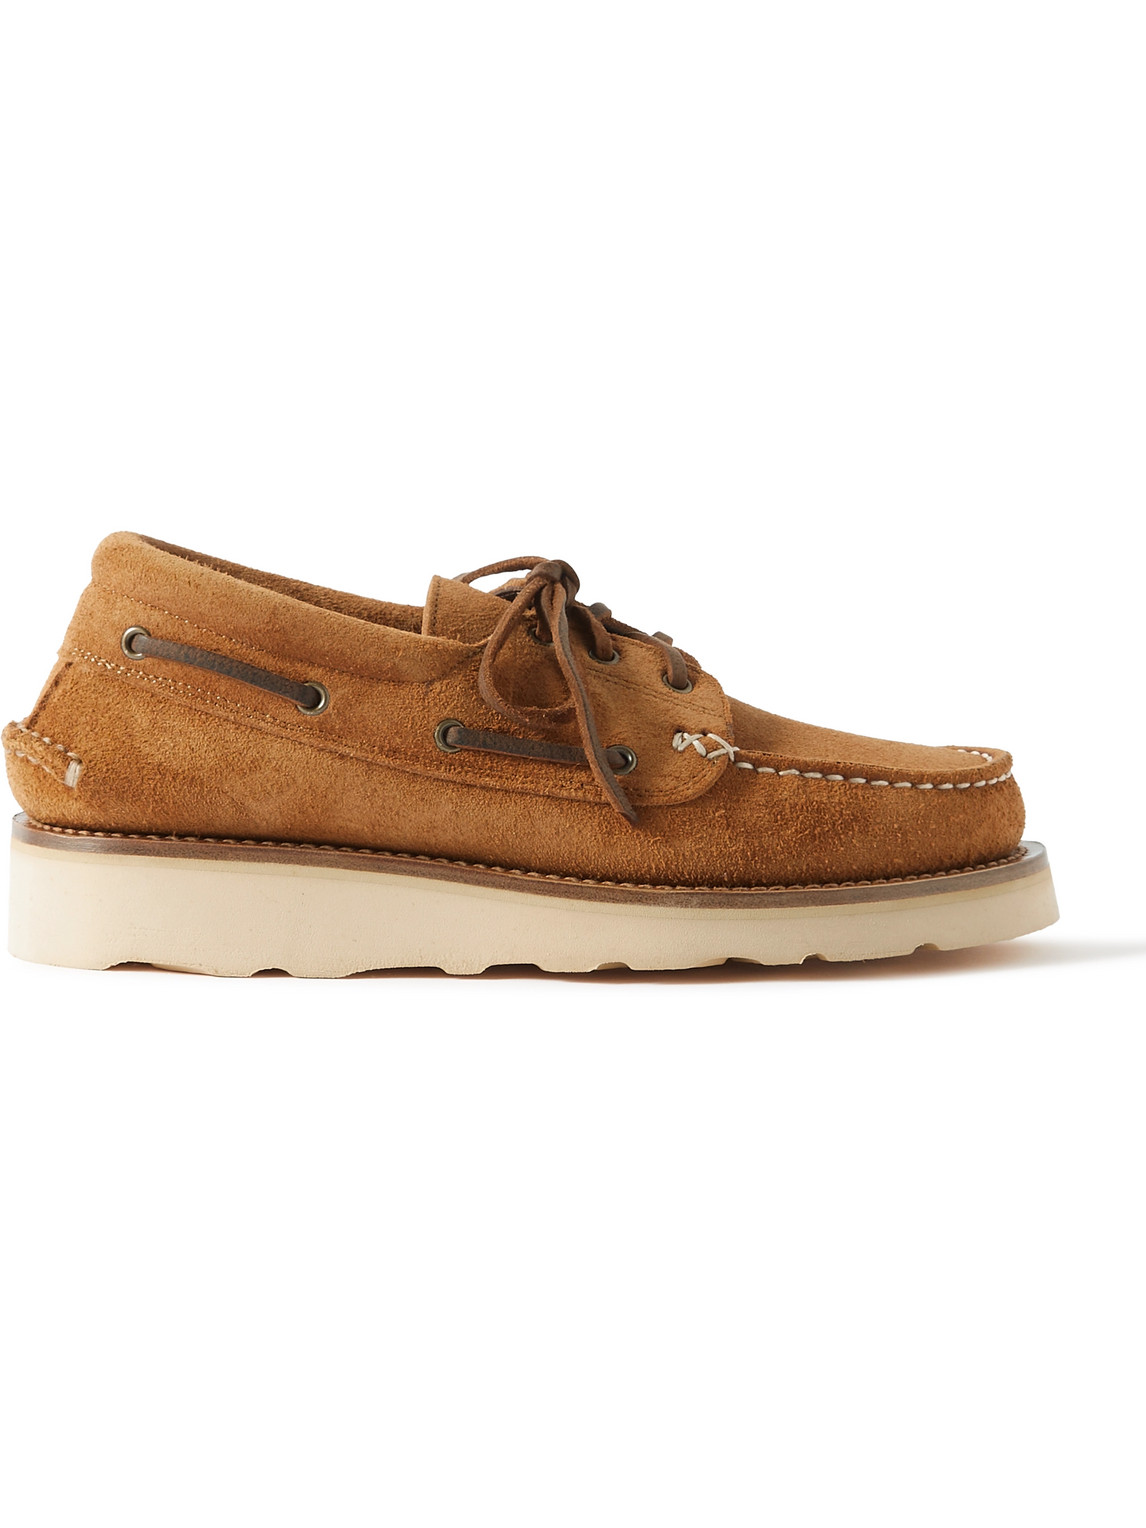 Land Barca Tosca Leather Boat Shoes